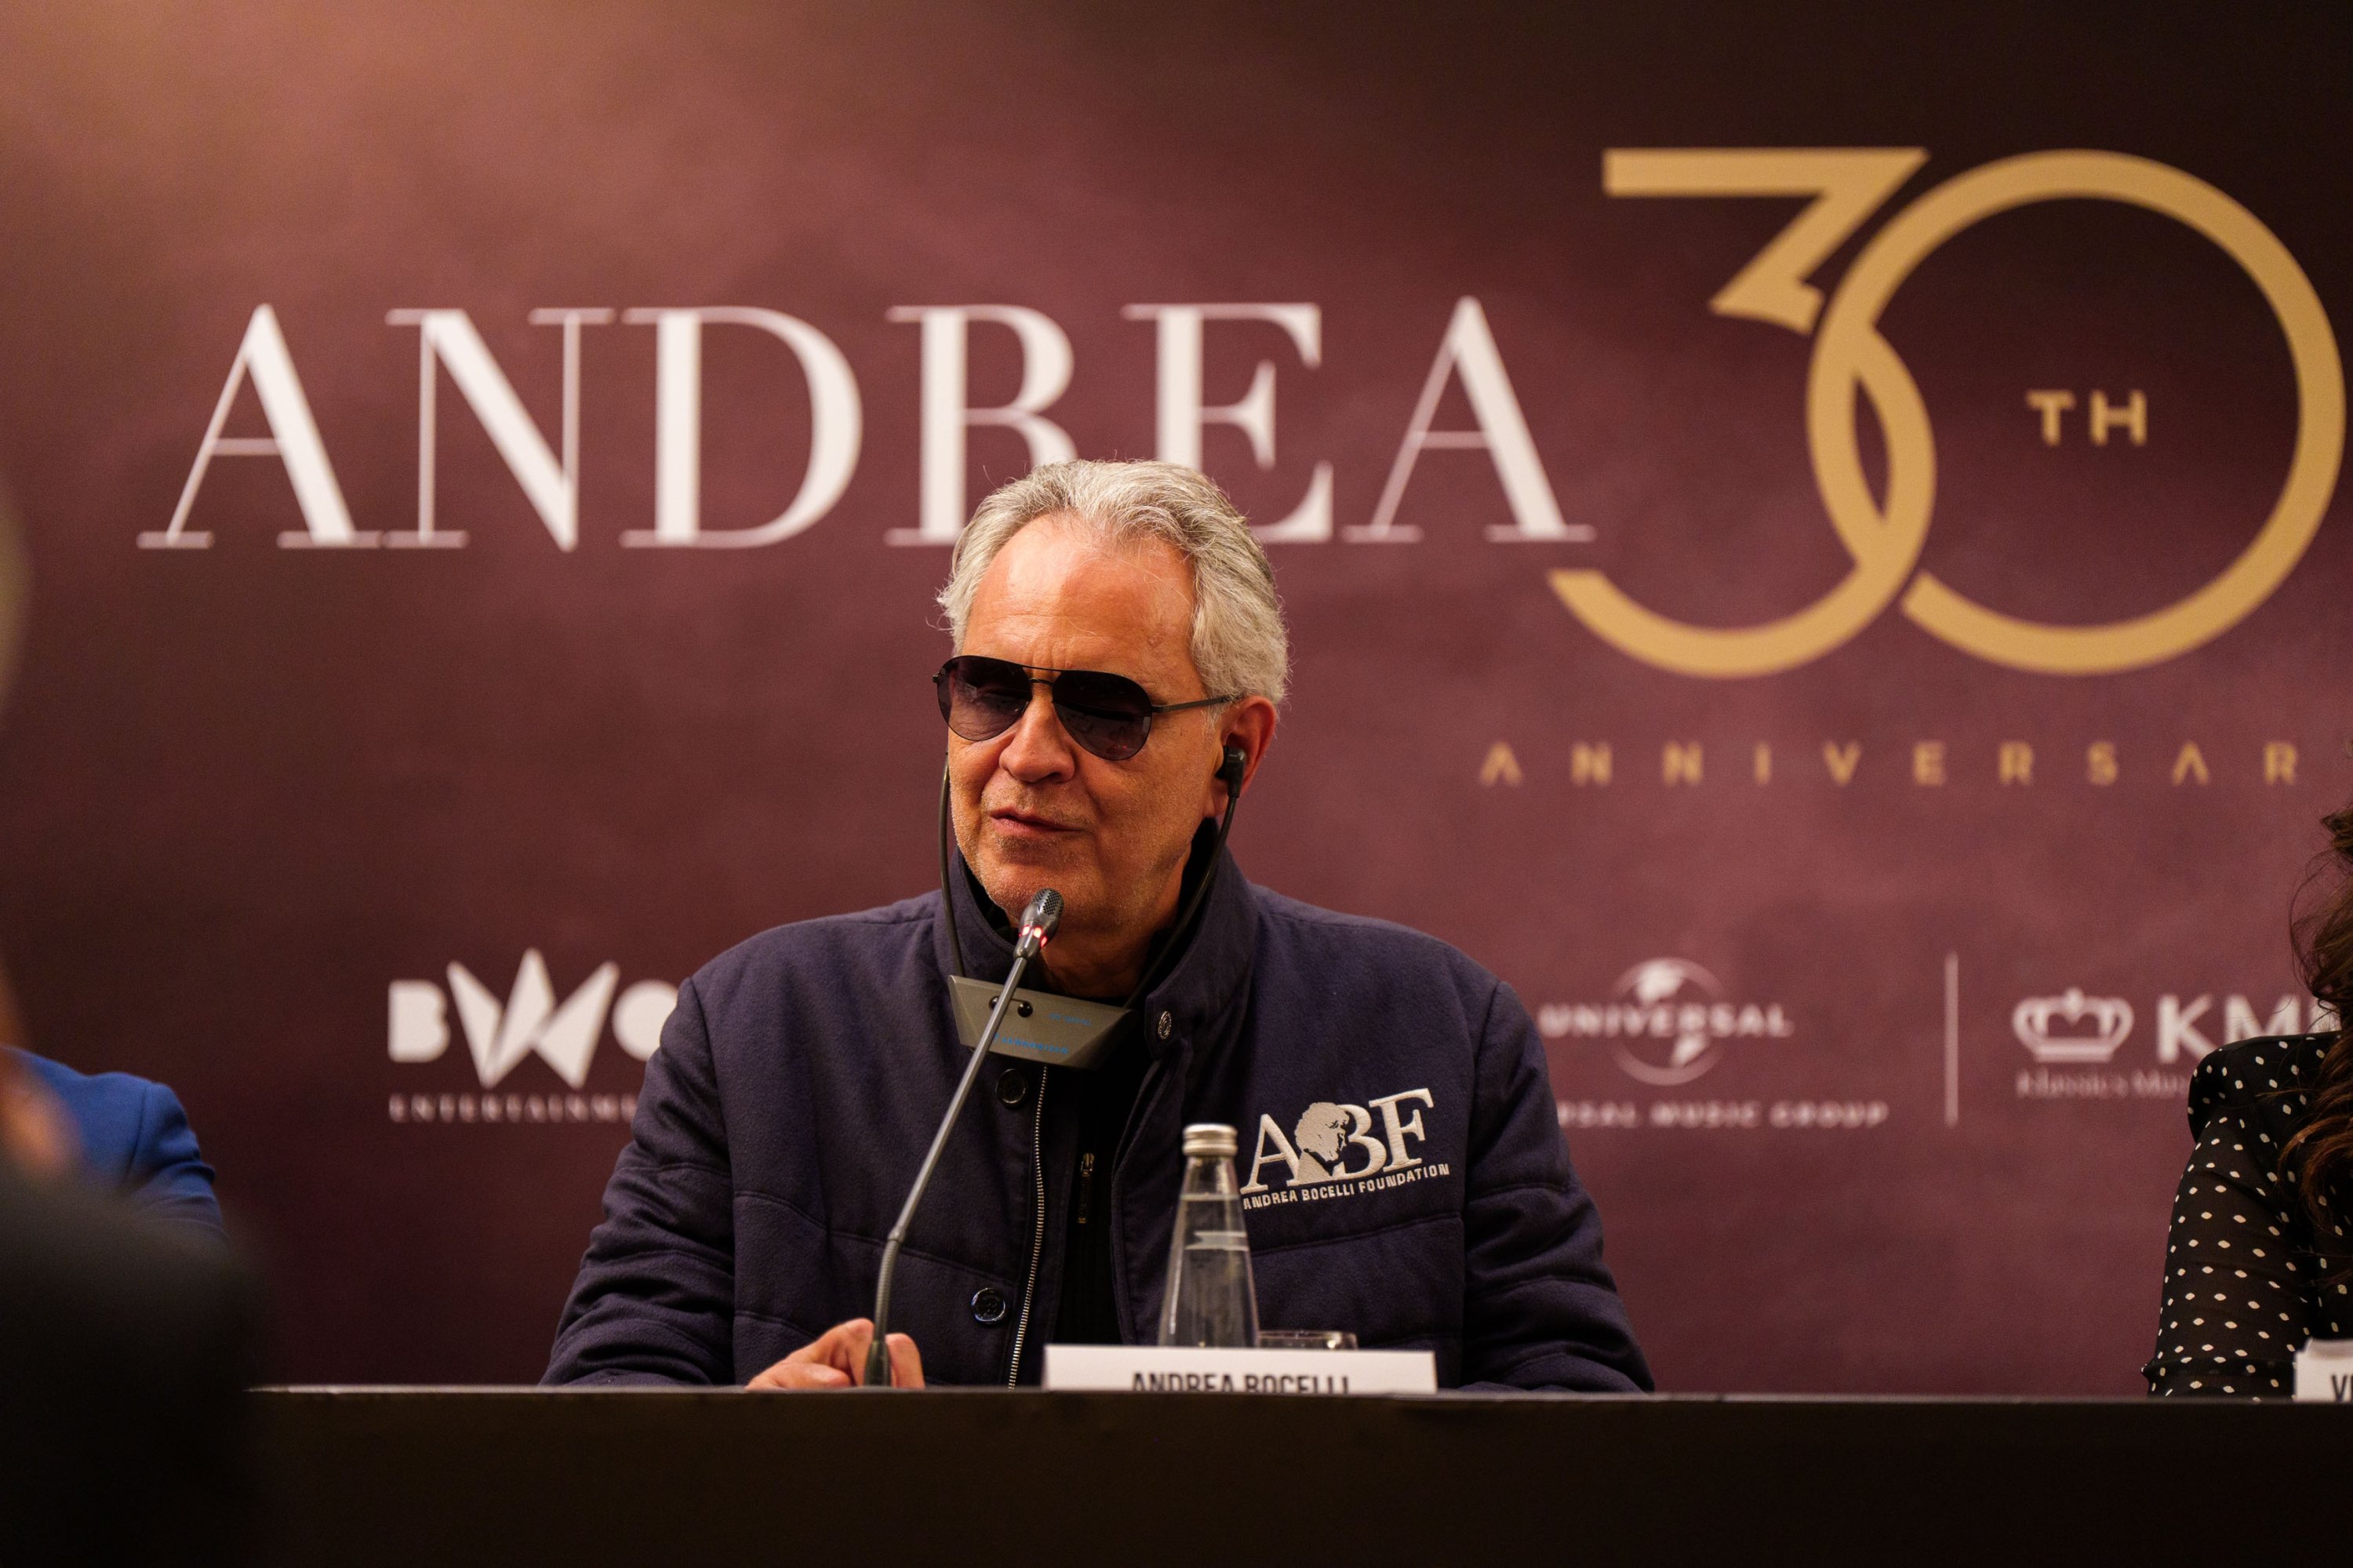 Andrea Bocelli records Christmas album with son Matteo, 24, and